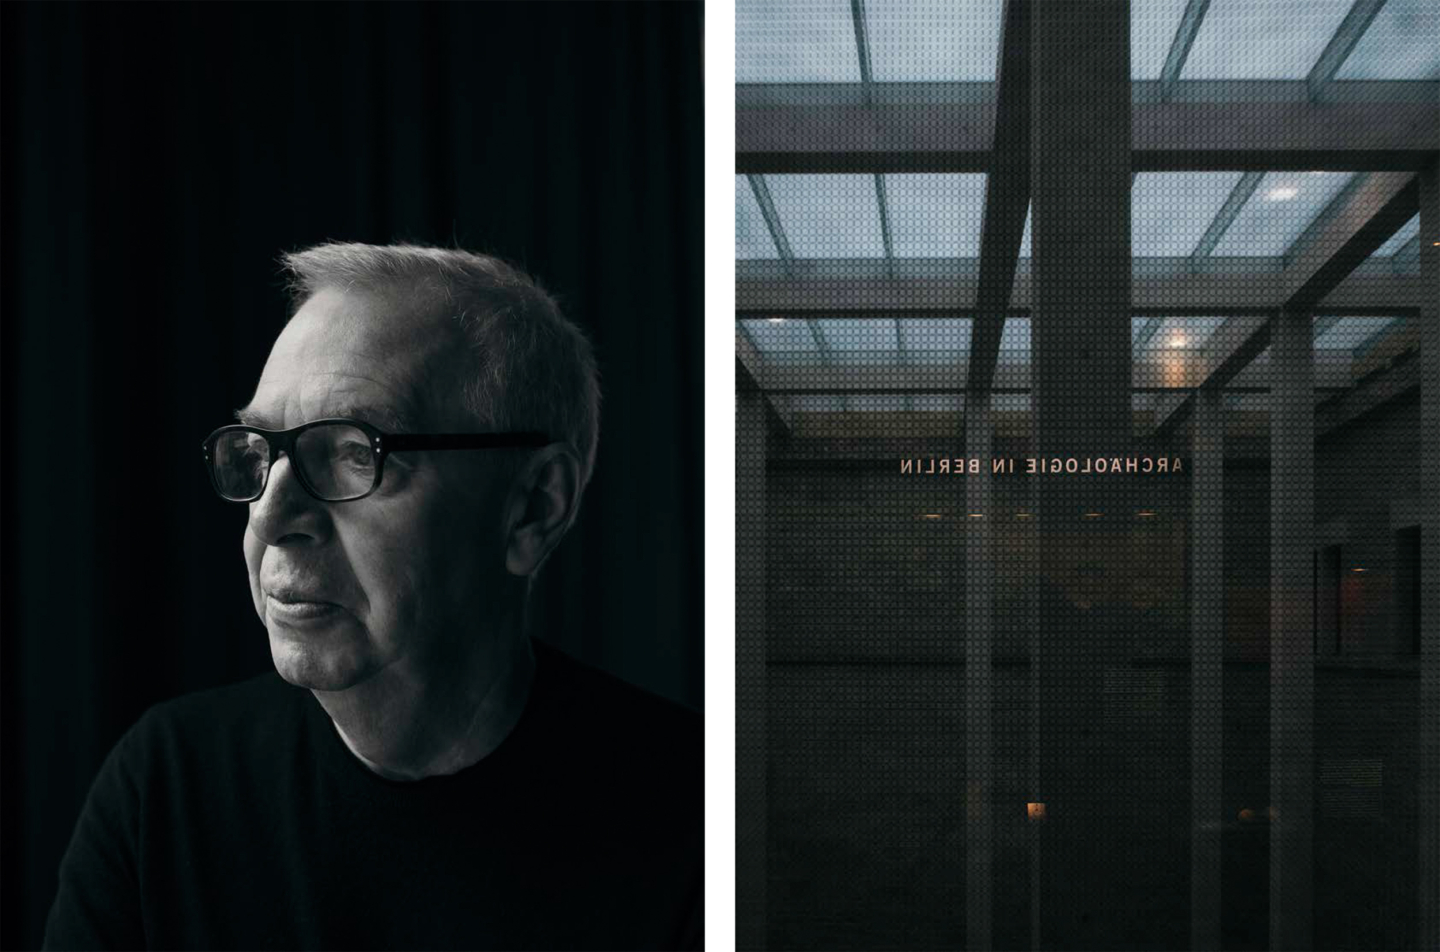 David Chipperfield for Nomad Magazine